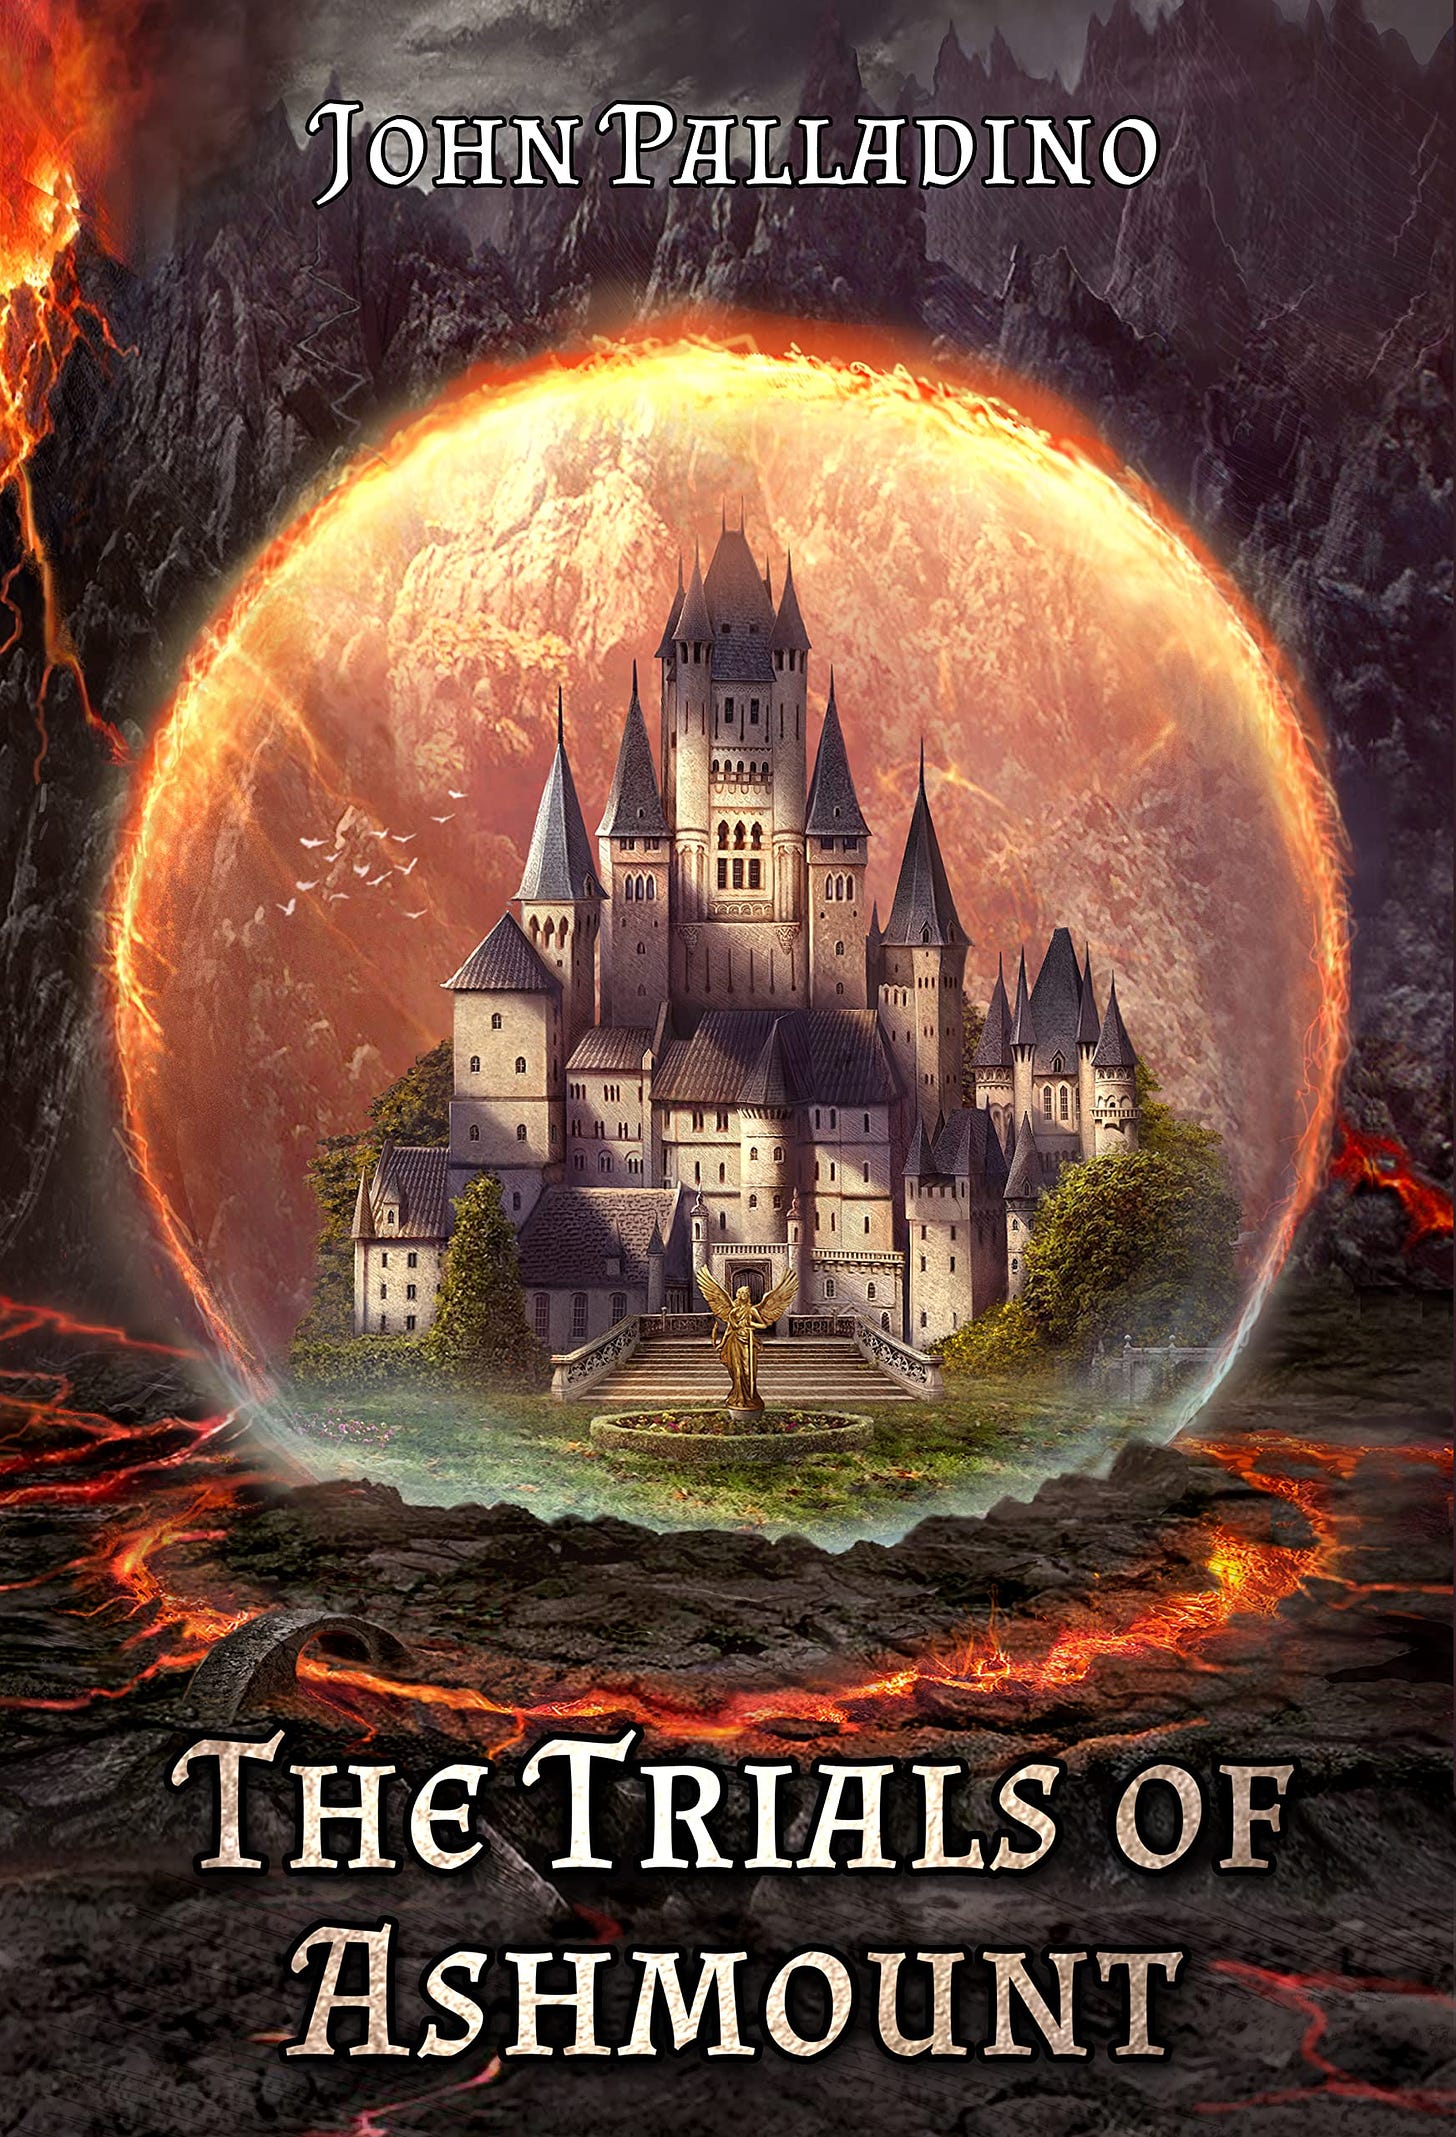 The Trials of Ashmount (Tragedy of Cedain #1) by John Palladino | Goodreads